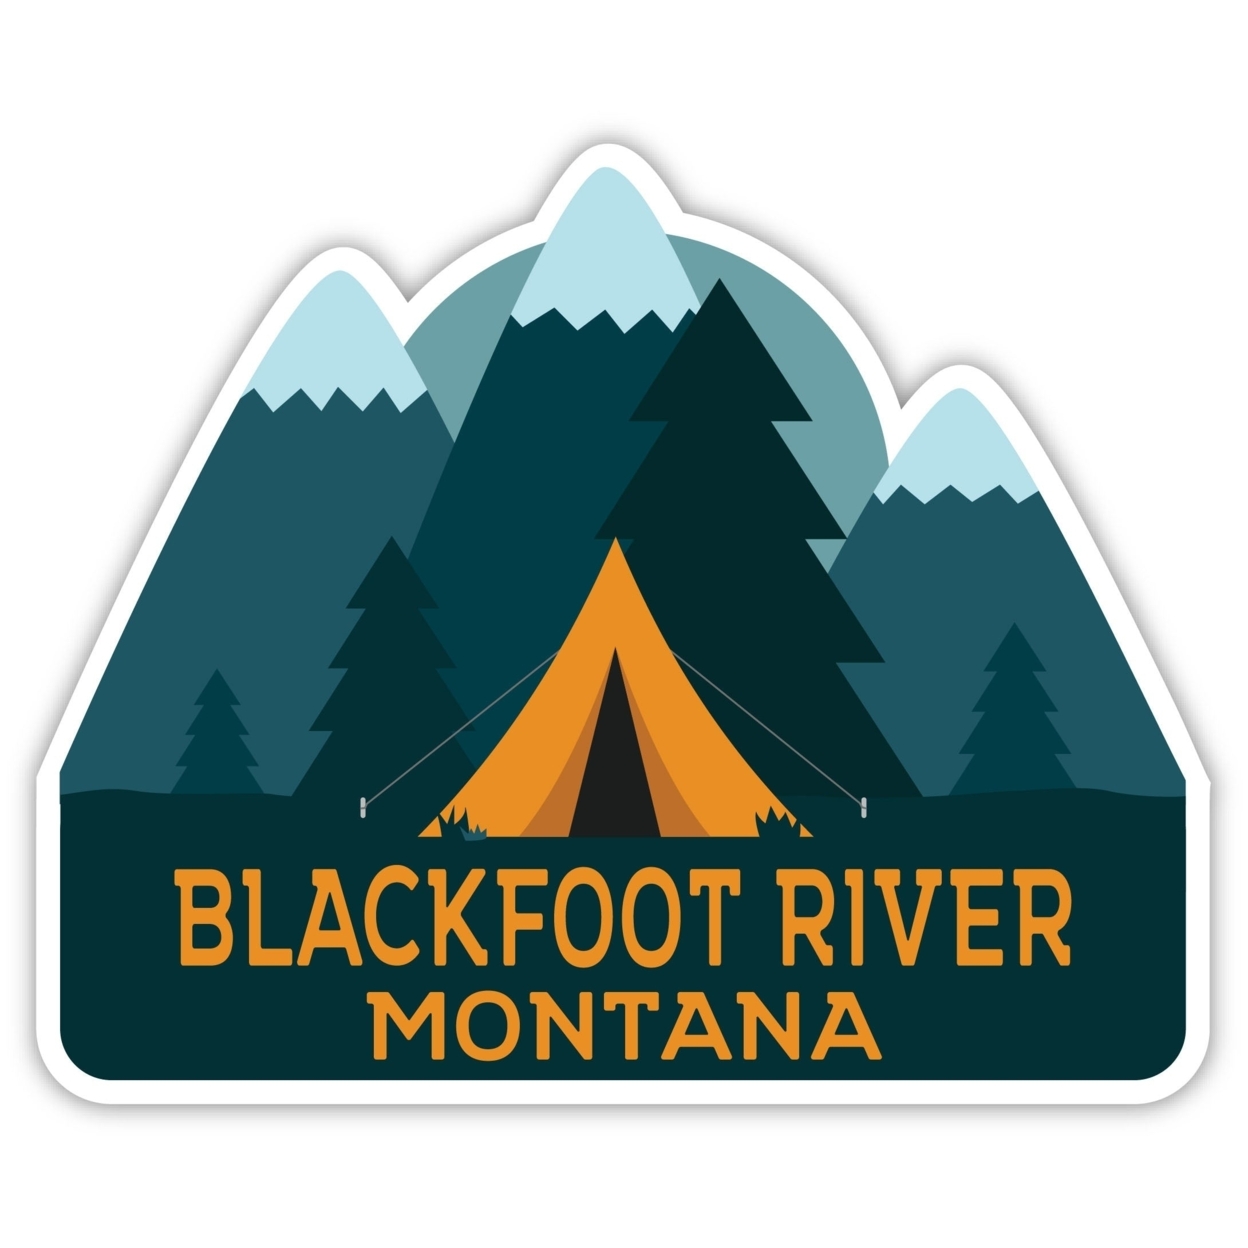 Blackfoot River Montana Souvenir Decorative Stickers (Choose Theme And Size) - 4-Pack, 6-Inch, Tent